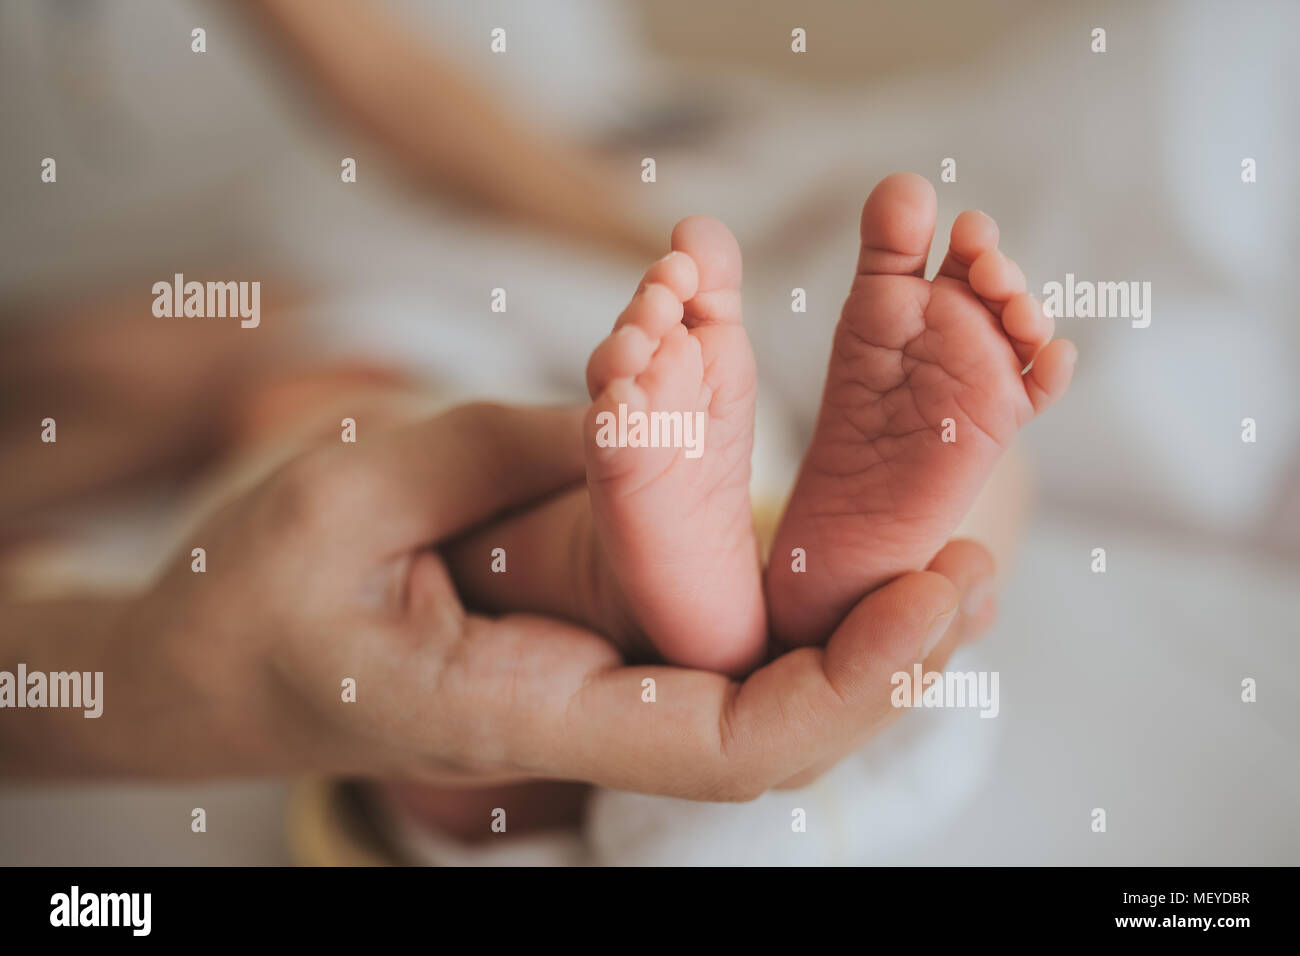 mother hold feets of newborn baby.Skin care concept. Stock Photo